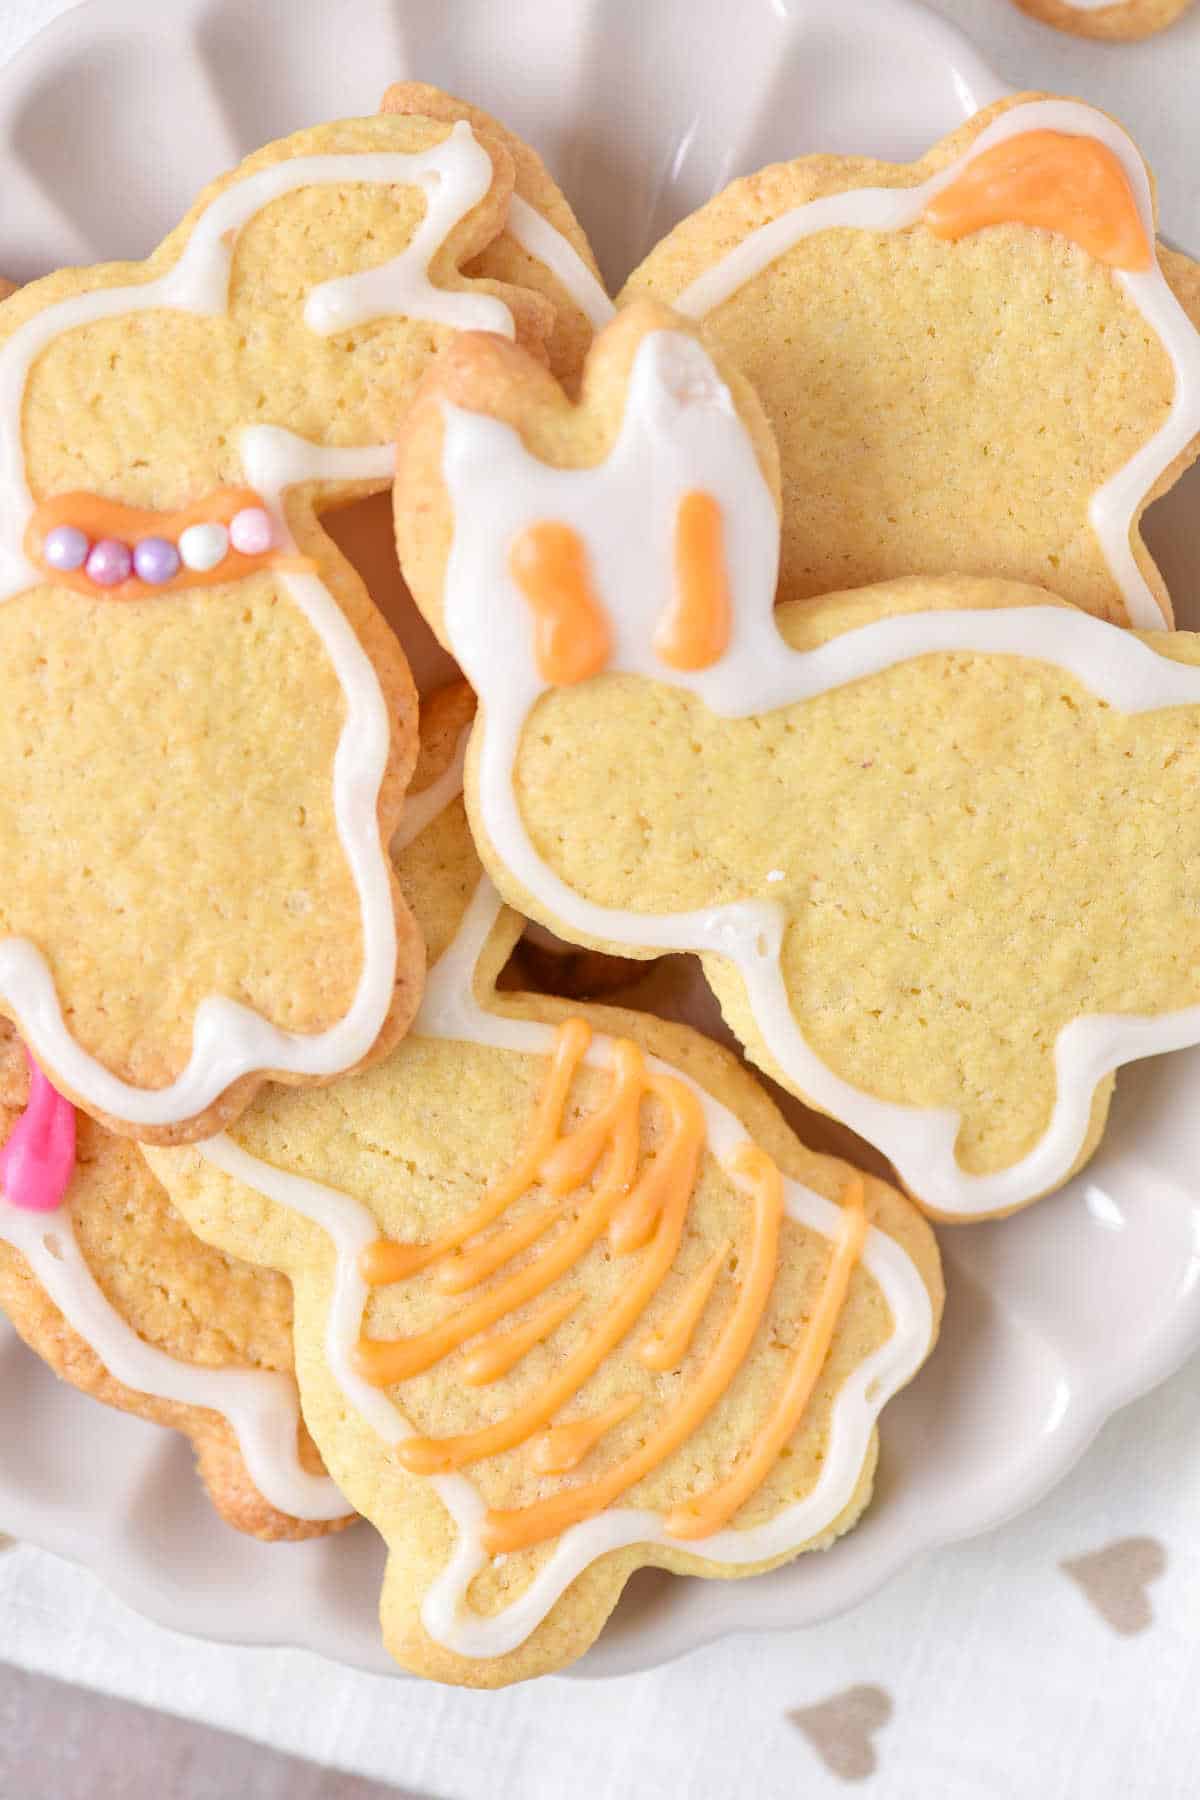 Close up of several orange and white glazed bunny sugar cookies piled on a white plate.